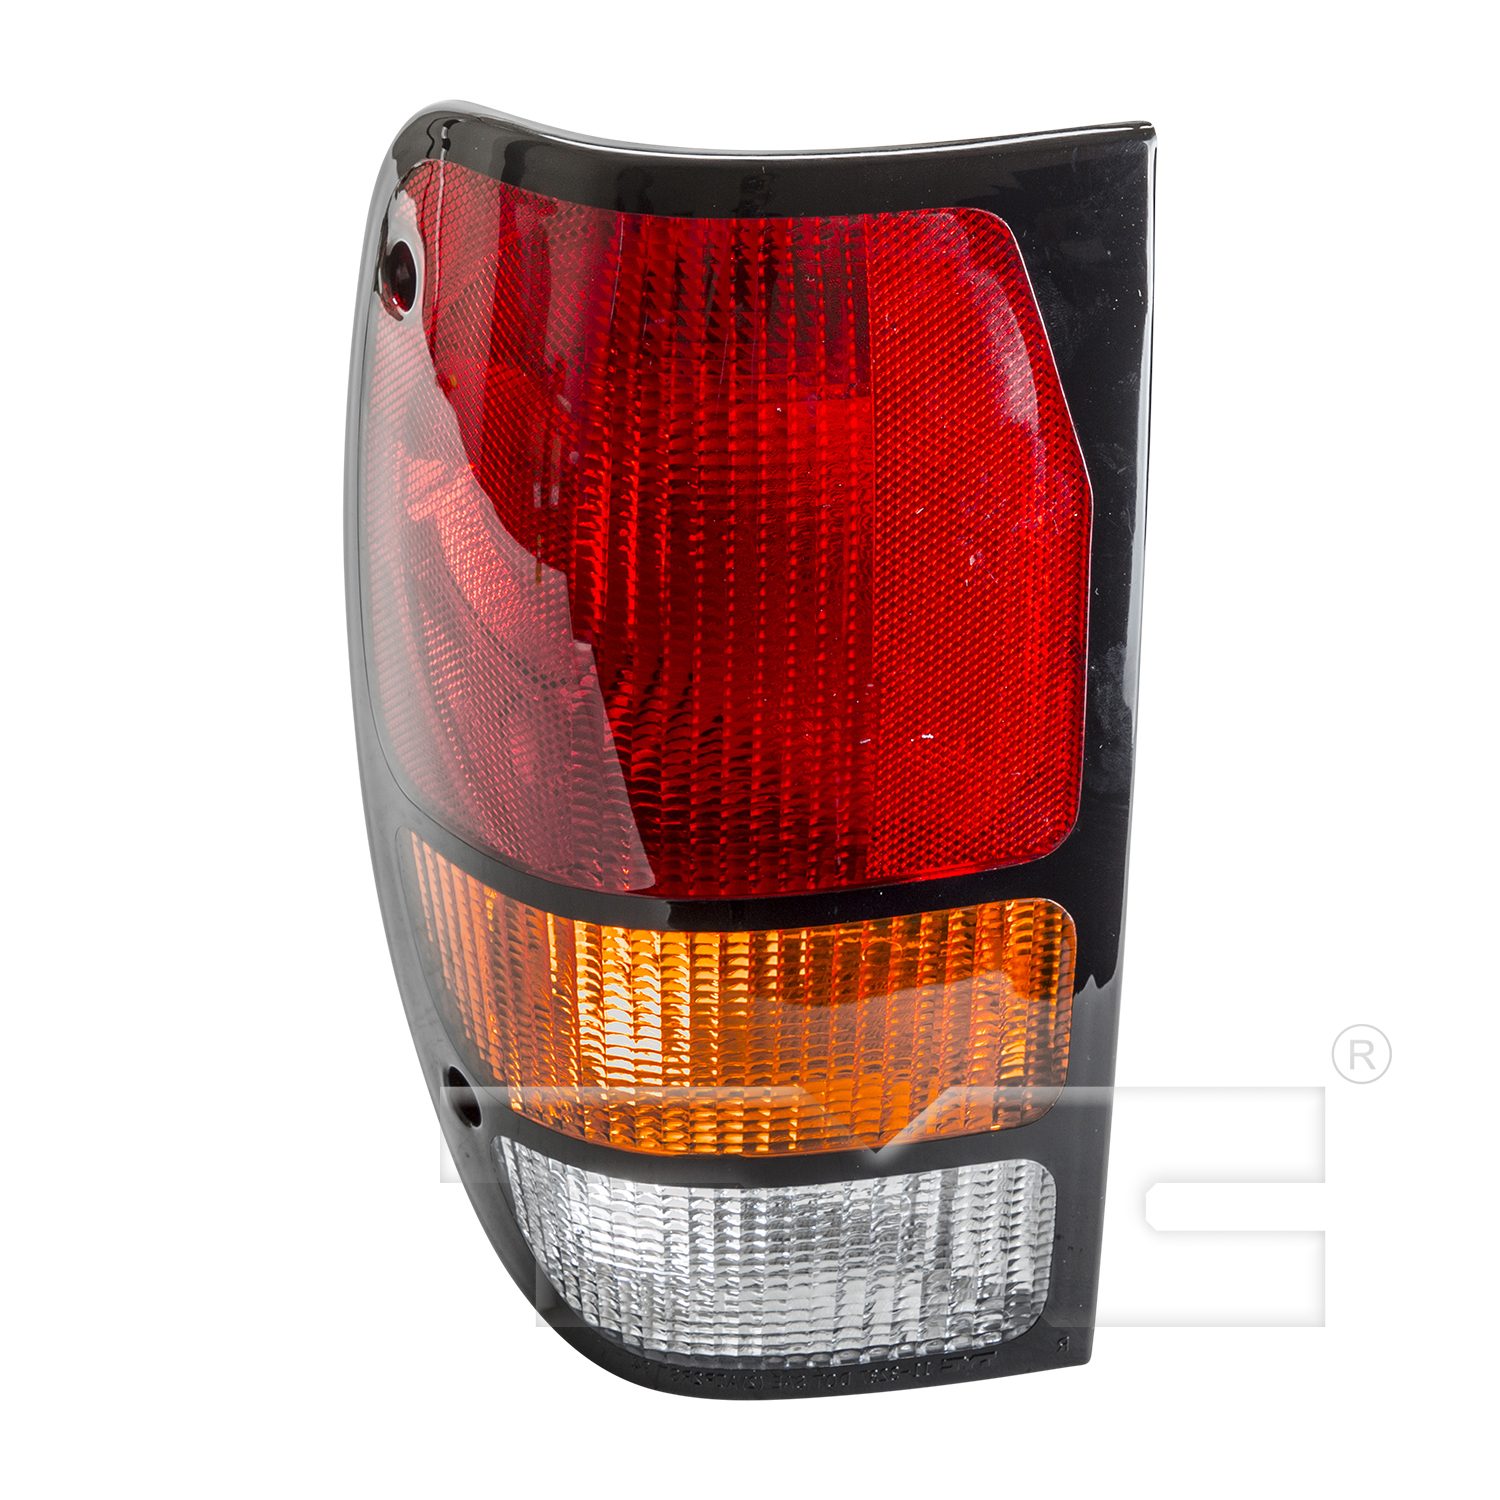 Aftermarket TAILLIGHTS for MAZDA - B4000, B4000,94-00,LT Taillamp assy